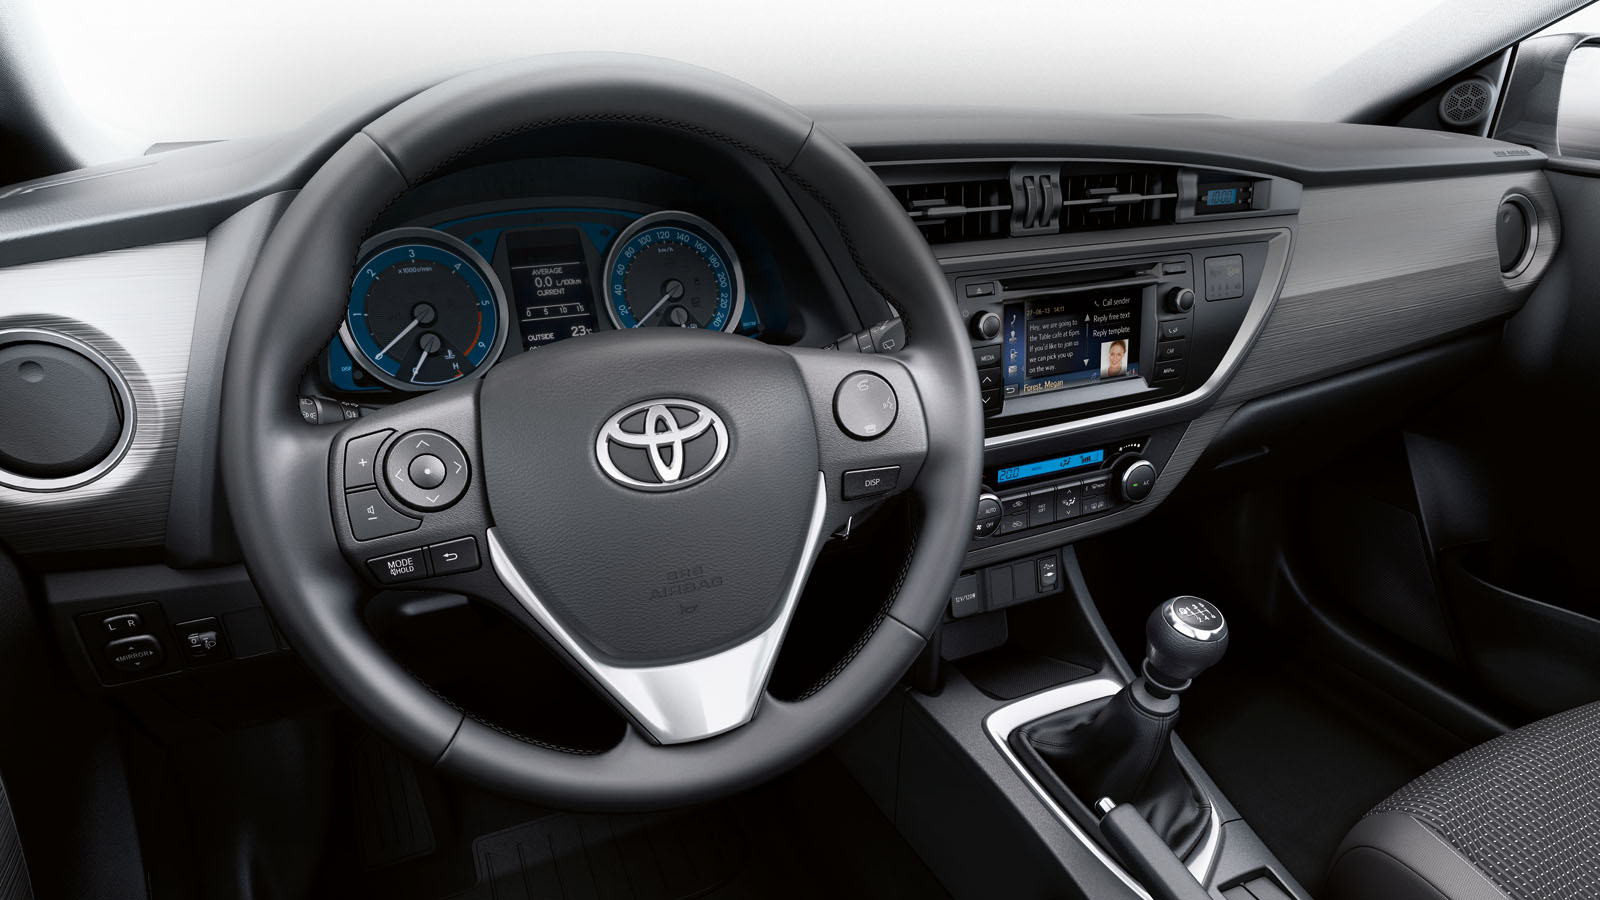 phones compatible with toyota bluetooth #5